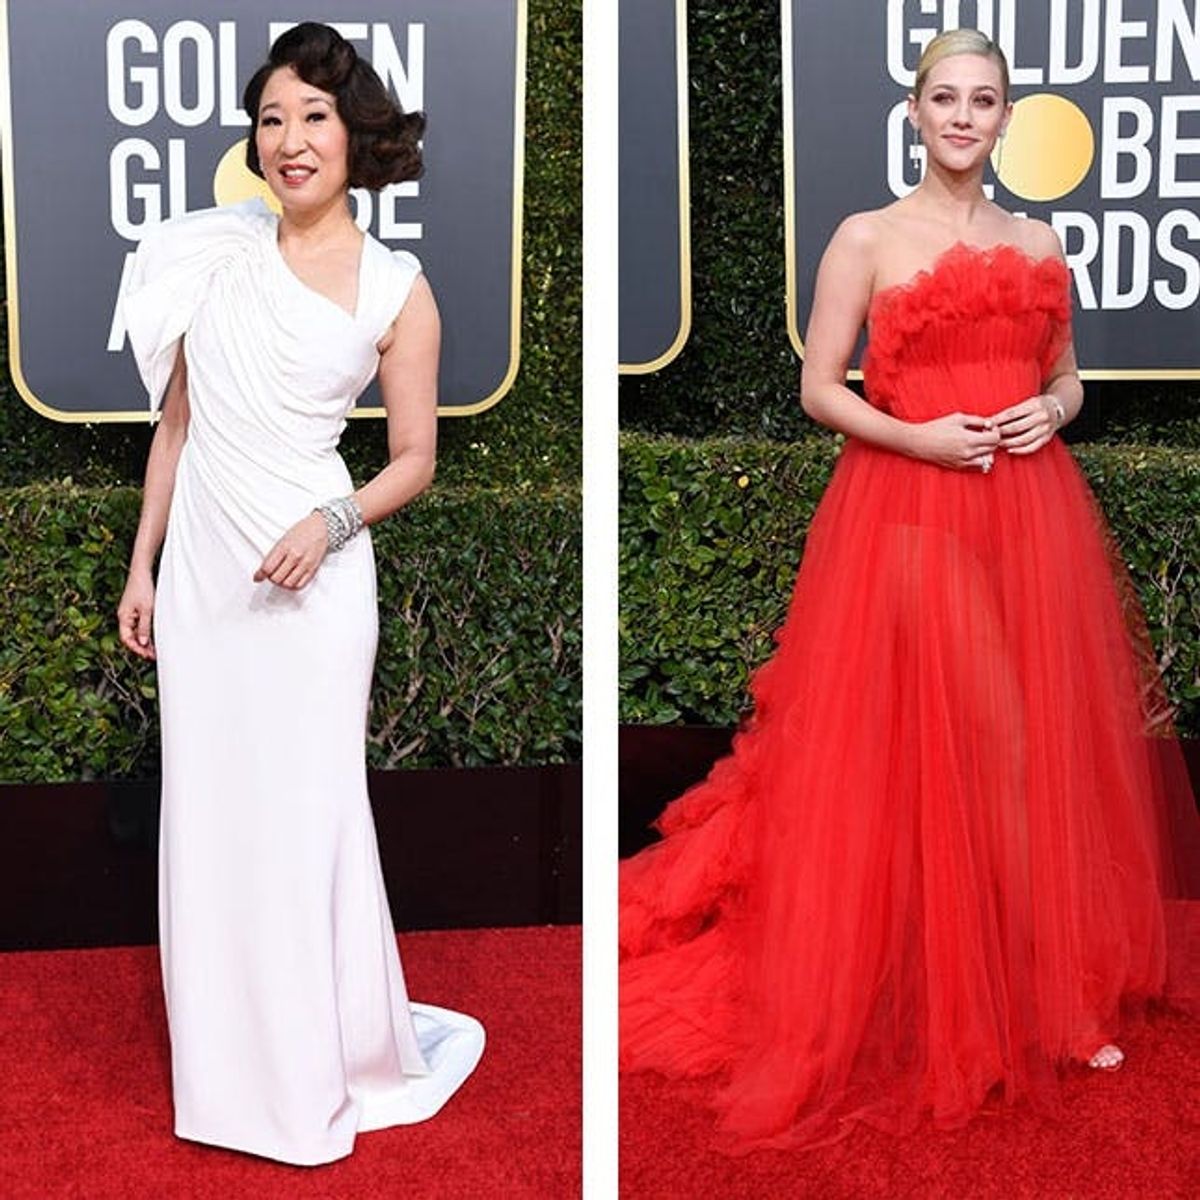 The Only 2019 Golden Globes Red Carpet Looks You Need to See